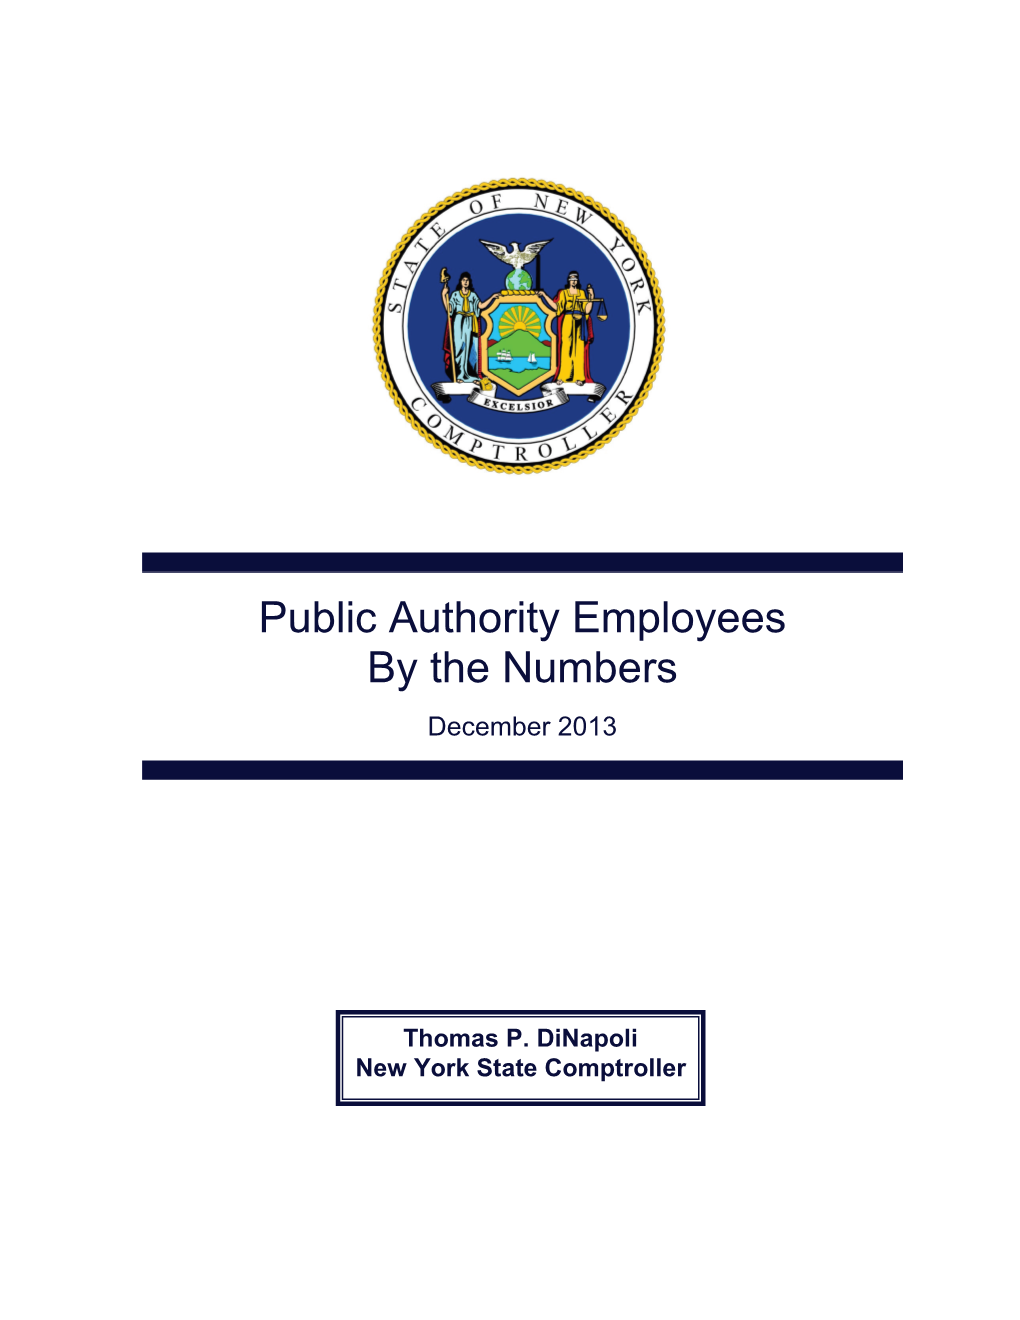 Public Authority Employees by the Numbers